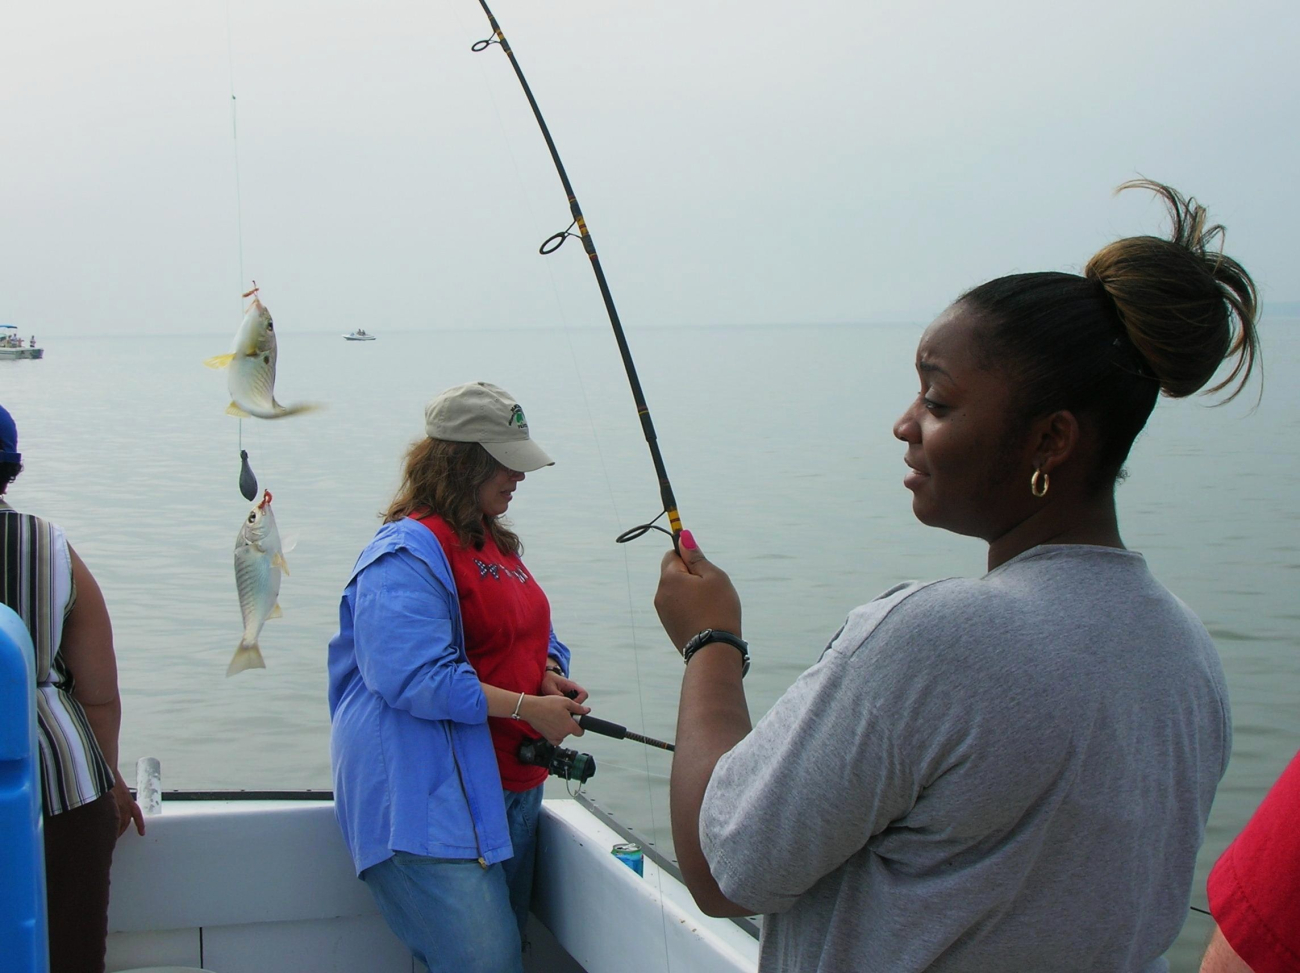 Catching fish two at a time on a calm Chesapeake Bay day